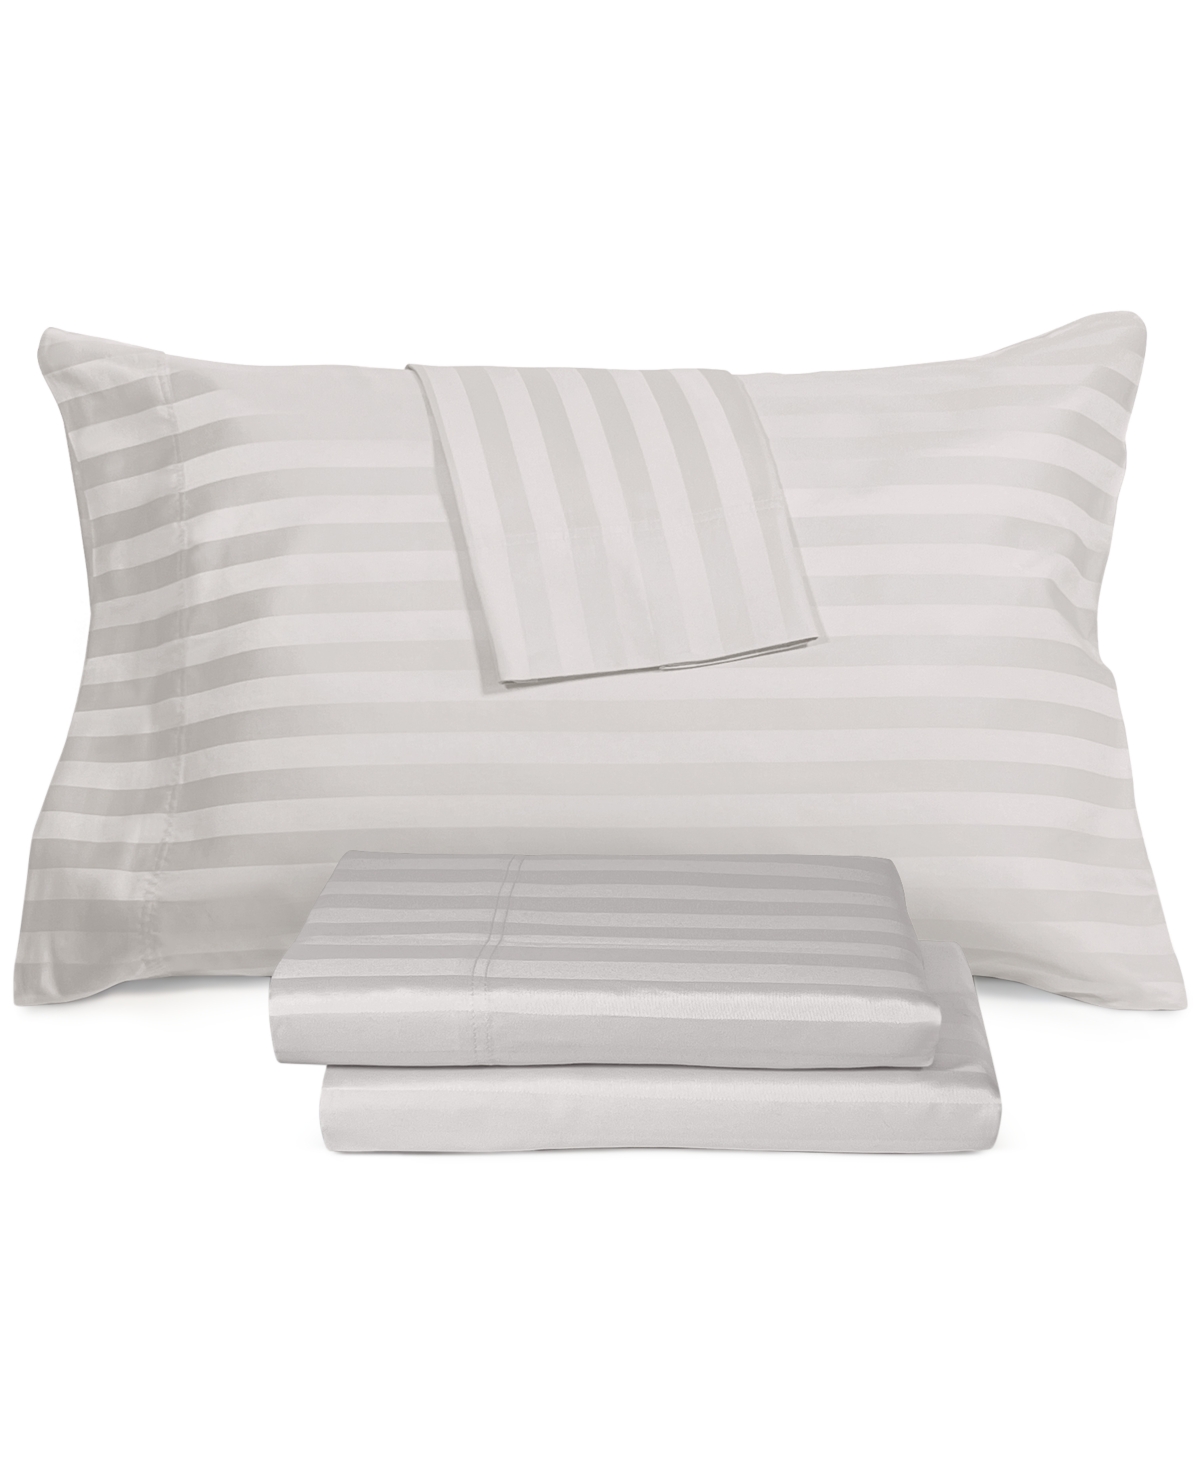 Aq Textiles Ultra Lux Wide Stripe 1200-thread Count 4-pc. Sheet Set, King Bedding In Grey